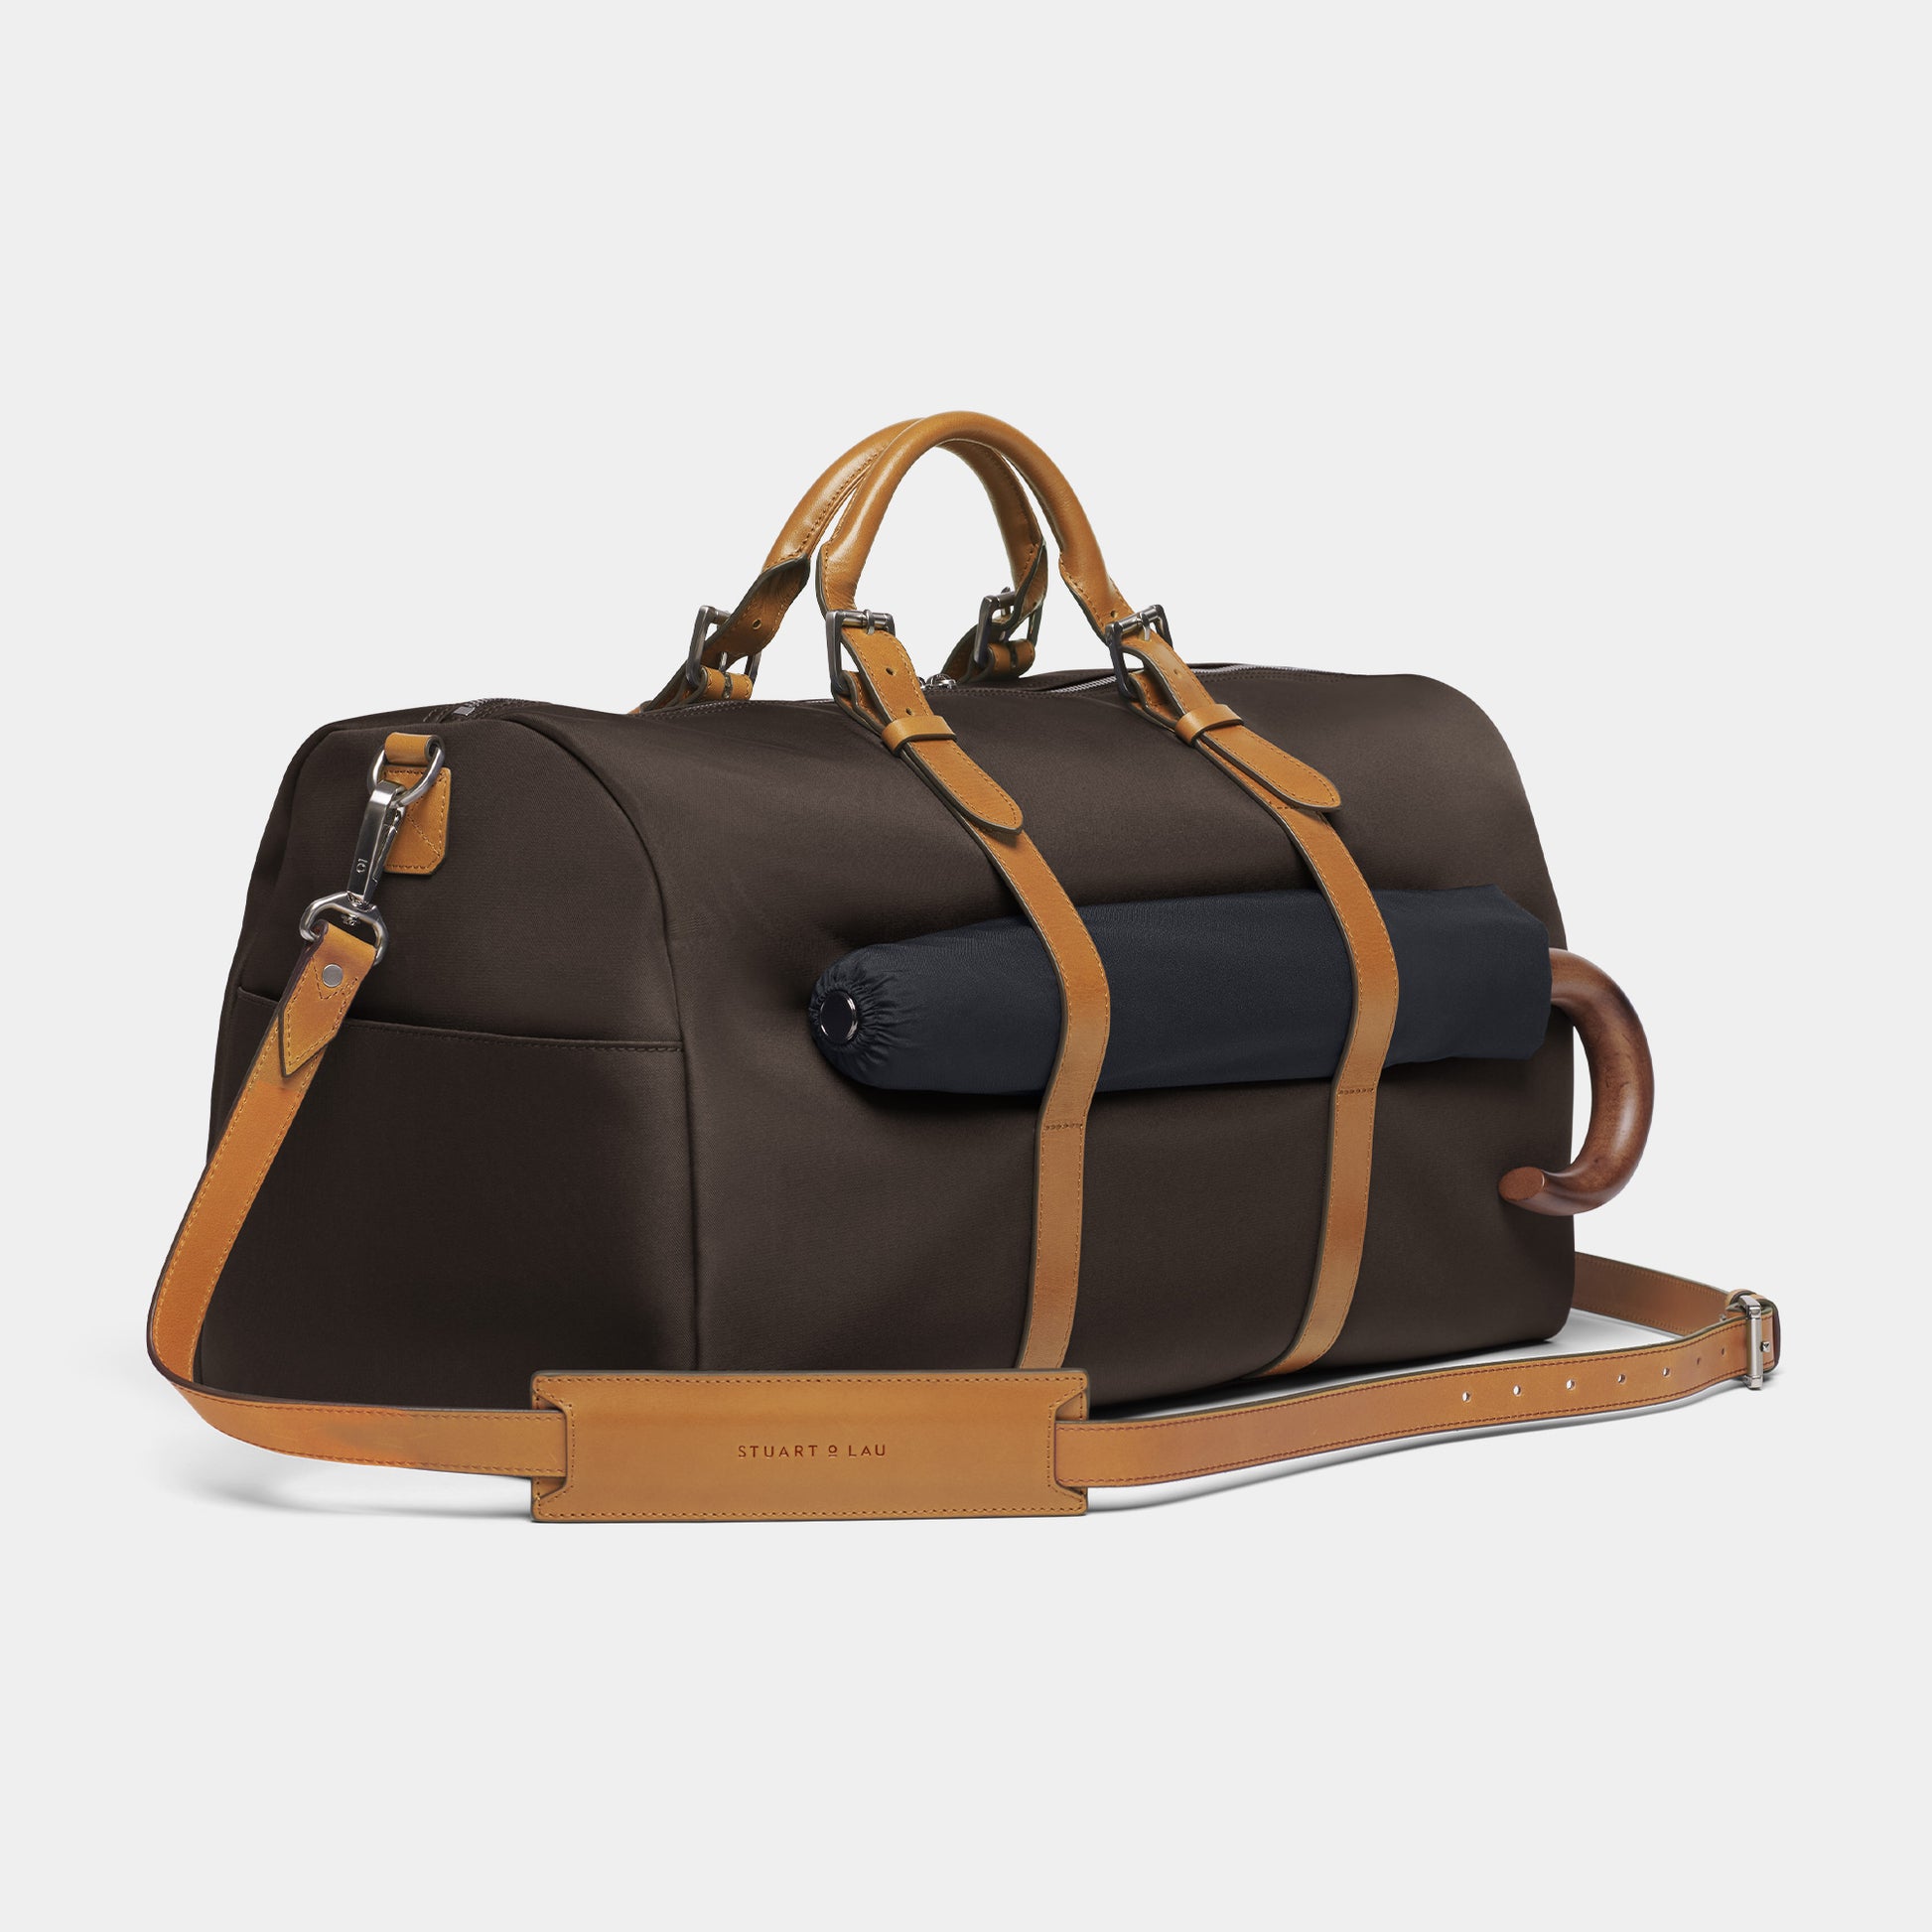 Louis Vuitton Bag With Pockets Portugal, SAVE 51% 